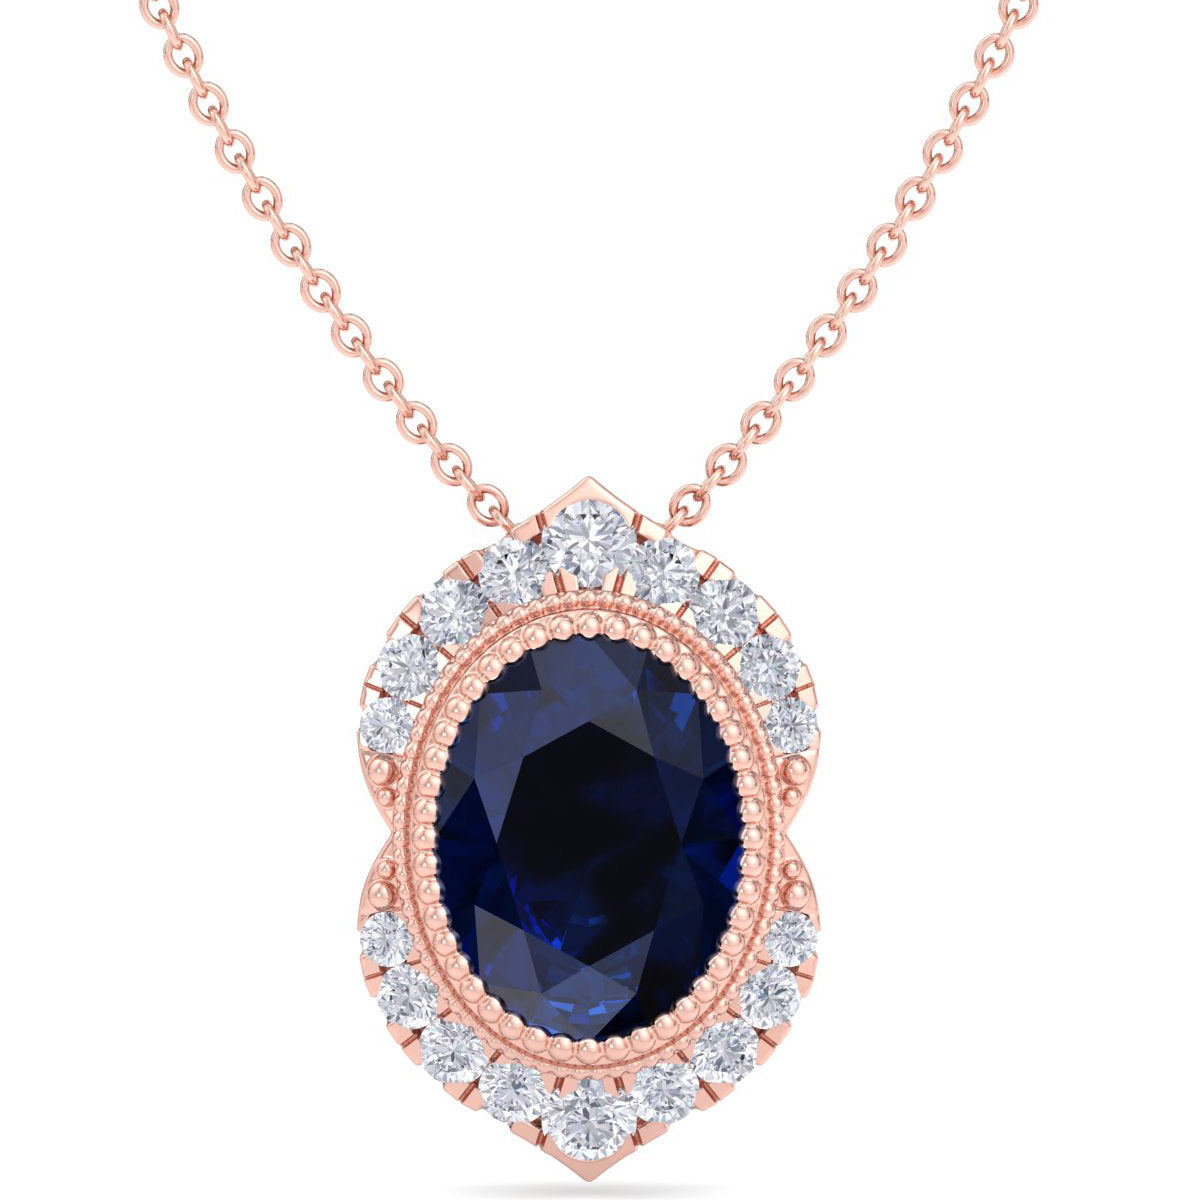 Sselects 1 3/4 Carat Oval Shape Sapphire And Diamond Necklace In 14k In Multi